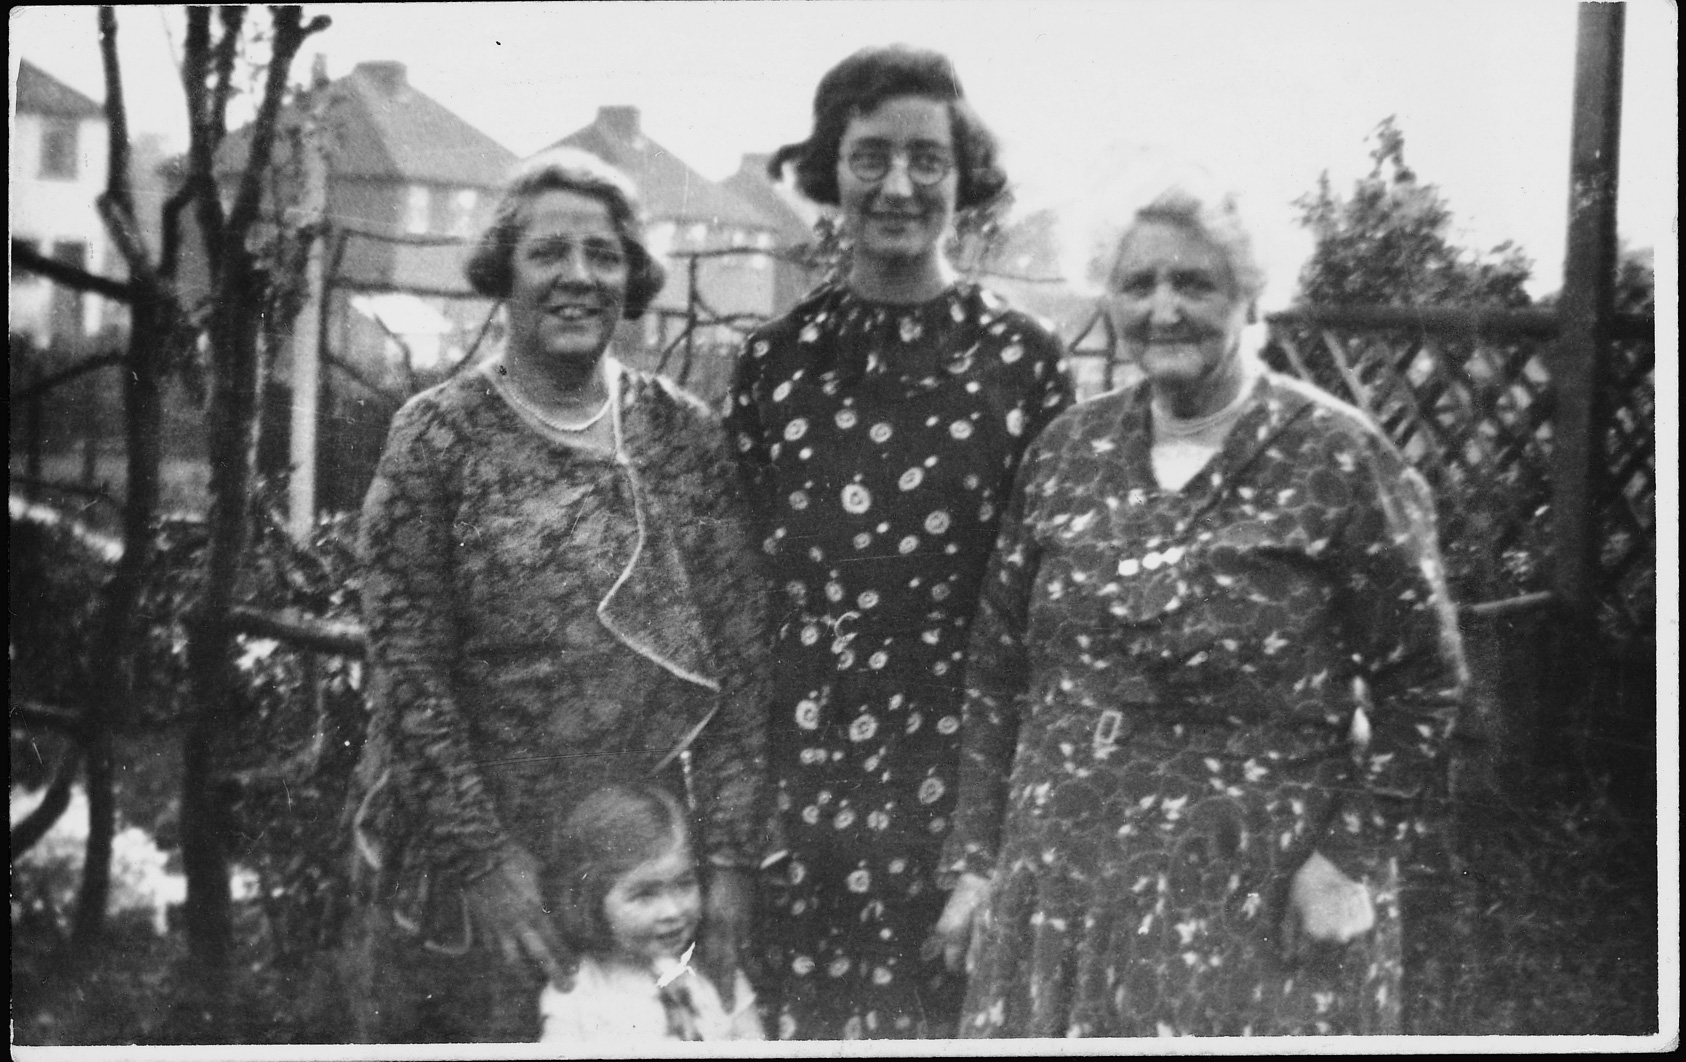 Four generations: Margaret Roberts, her mother Elsie Ivy Roberts, grandmother Hannah (Barnes) Tappin and great-grandmother Susan (Hawkins) Barnes. c.1938